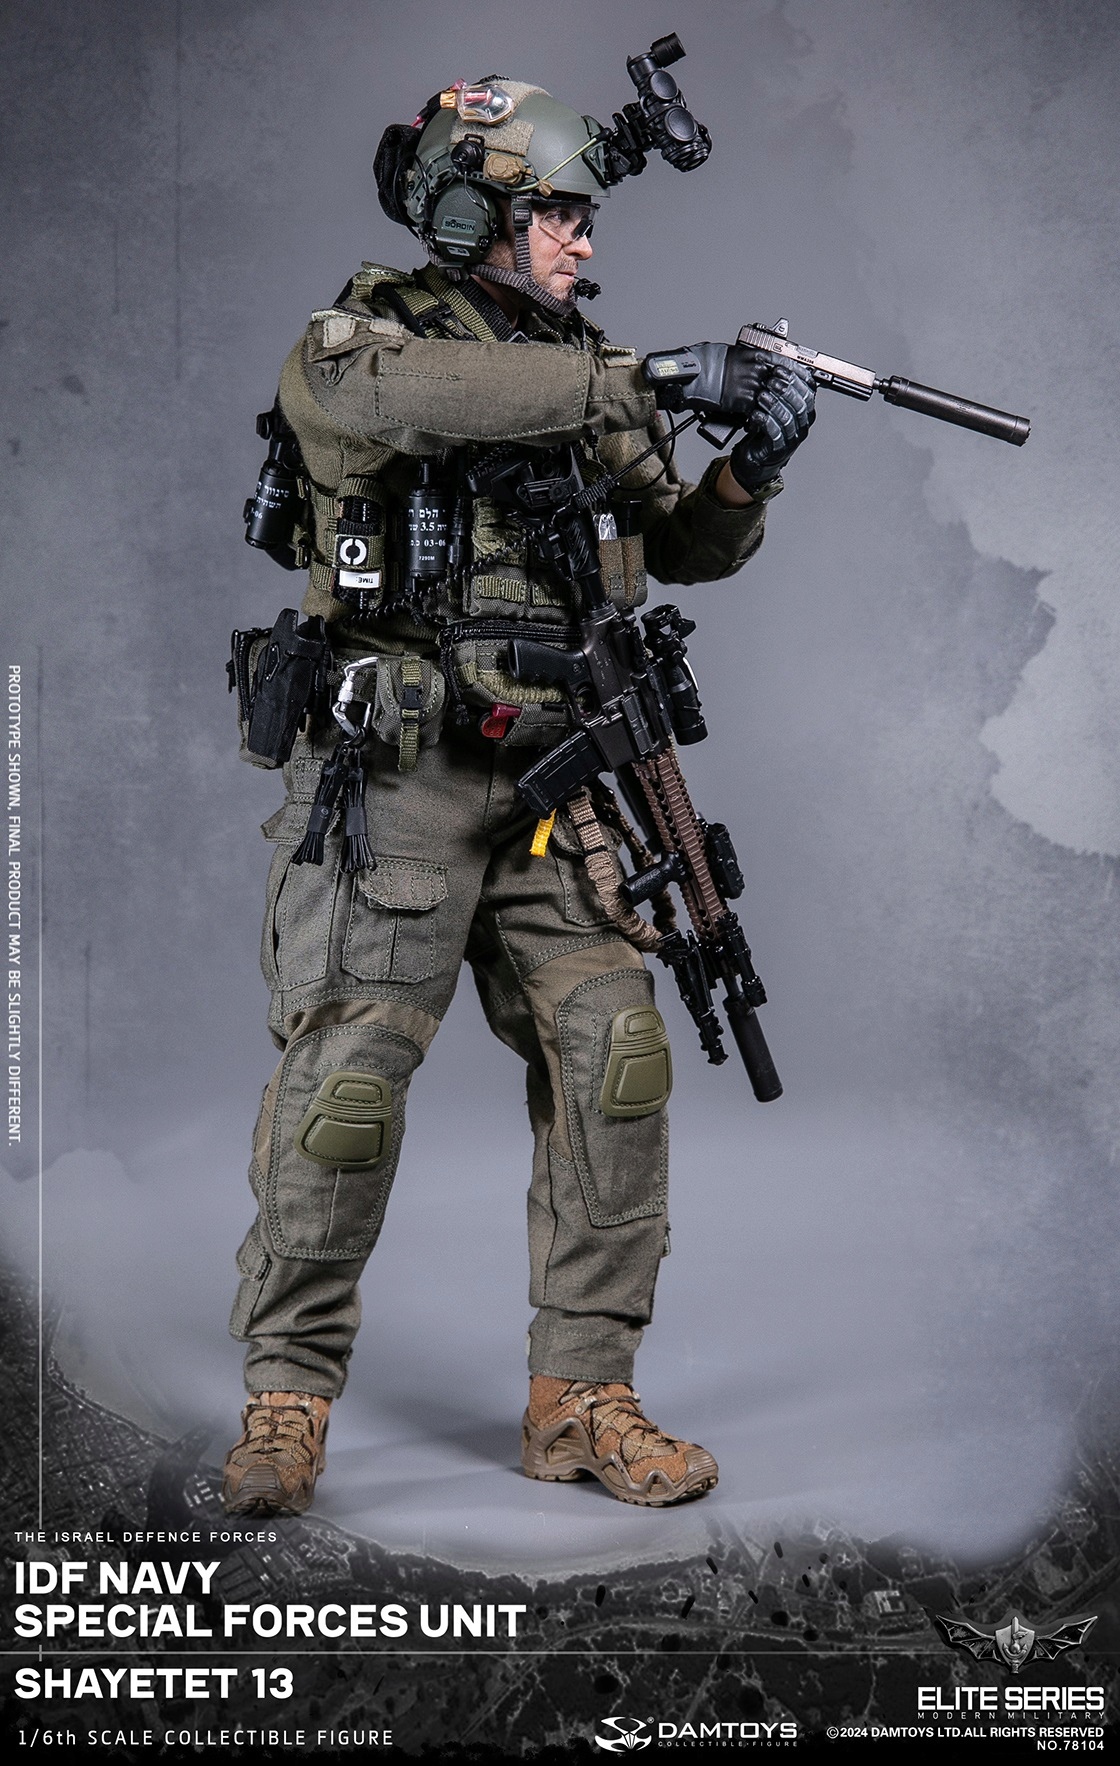 Soldier - NEW PRODUCT: DAMTOYS - Israeli IDF Naval Special Forces-13th Commando #78104 15200